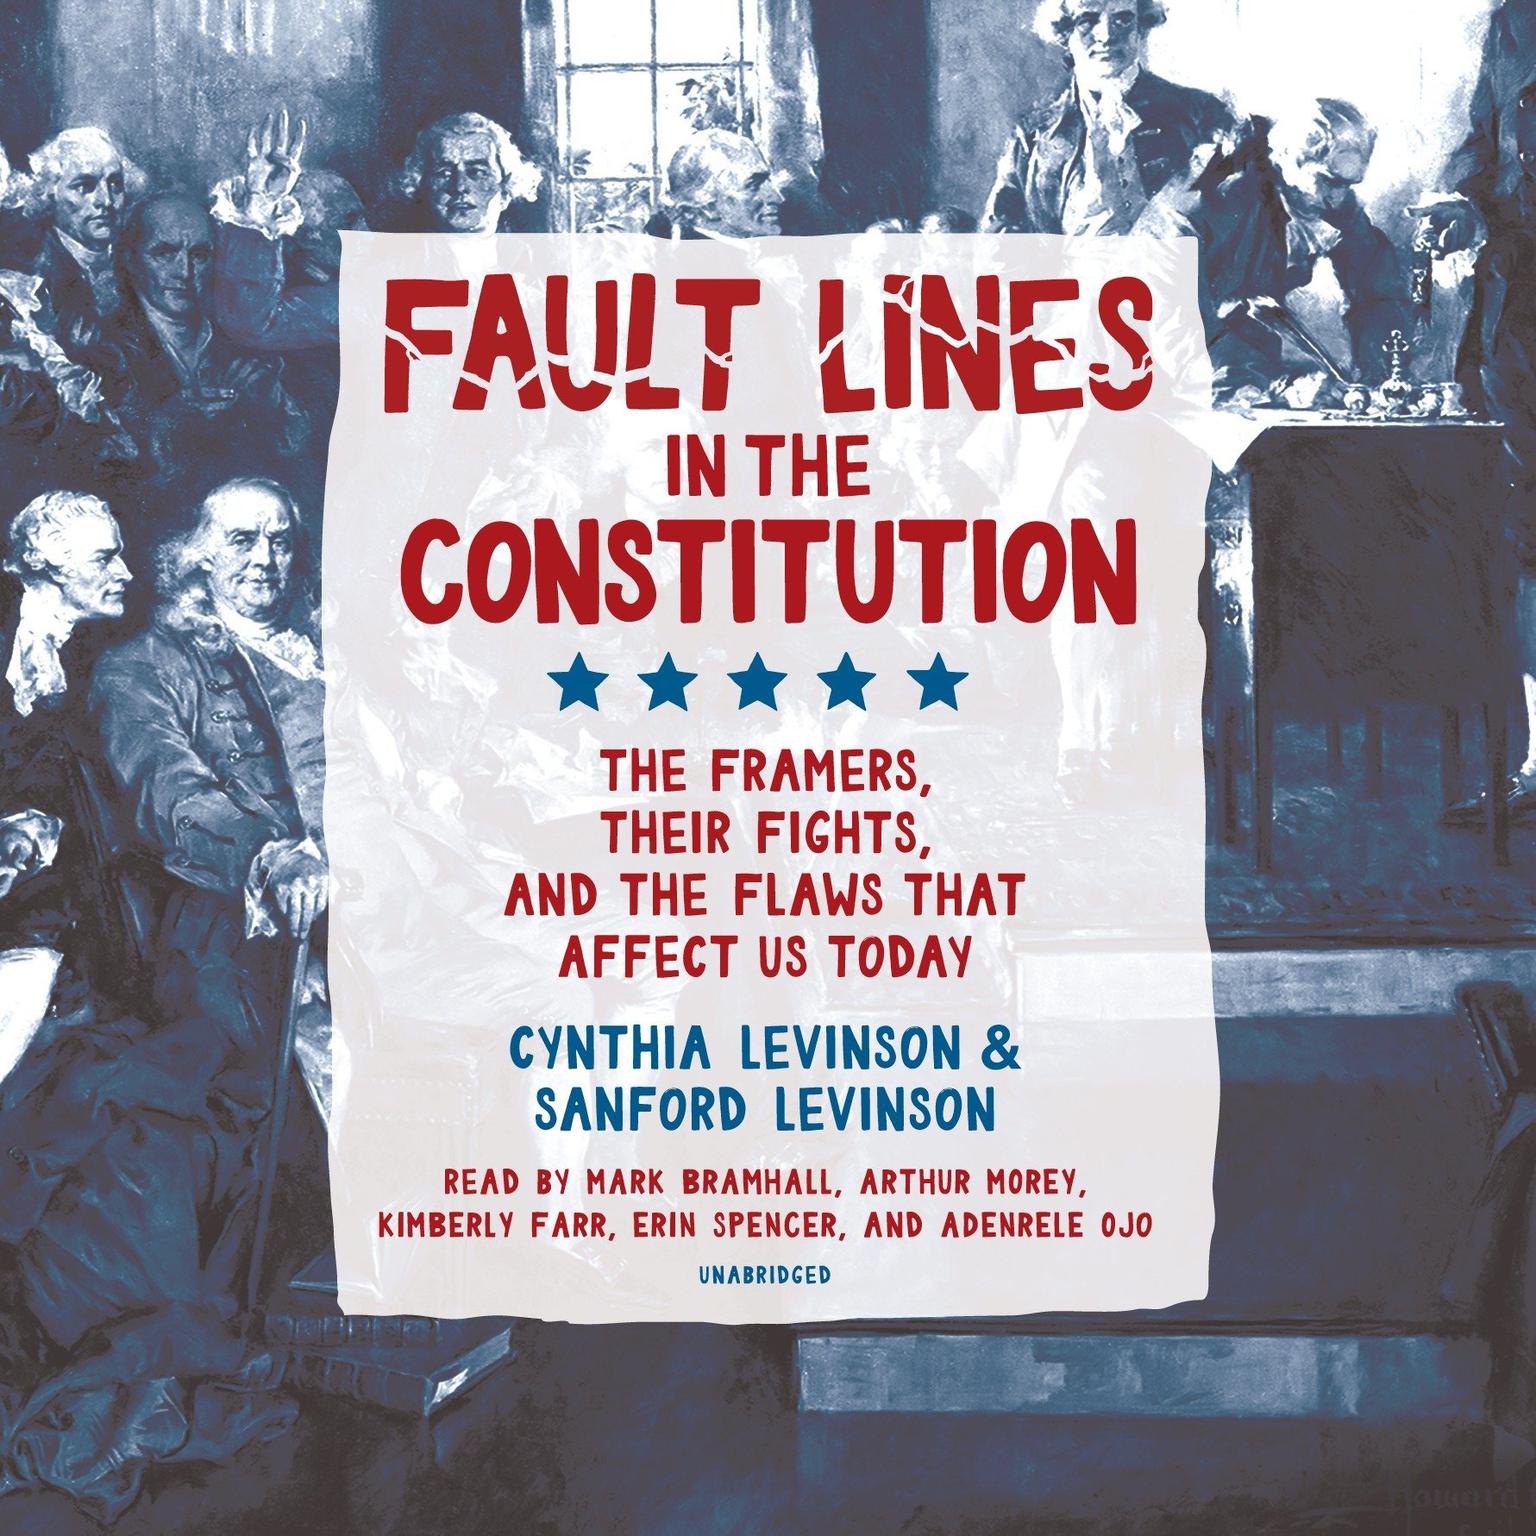 Fault Lines in the Constitution: The Framers, Their Fights, and the Flaws that Affect Us Today Audiobook, by Cynthia Levinson